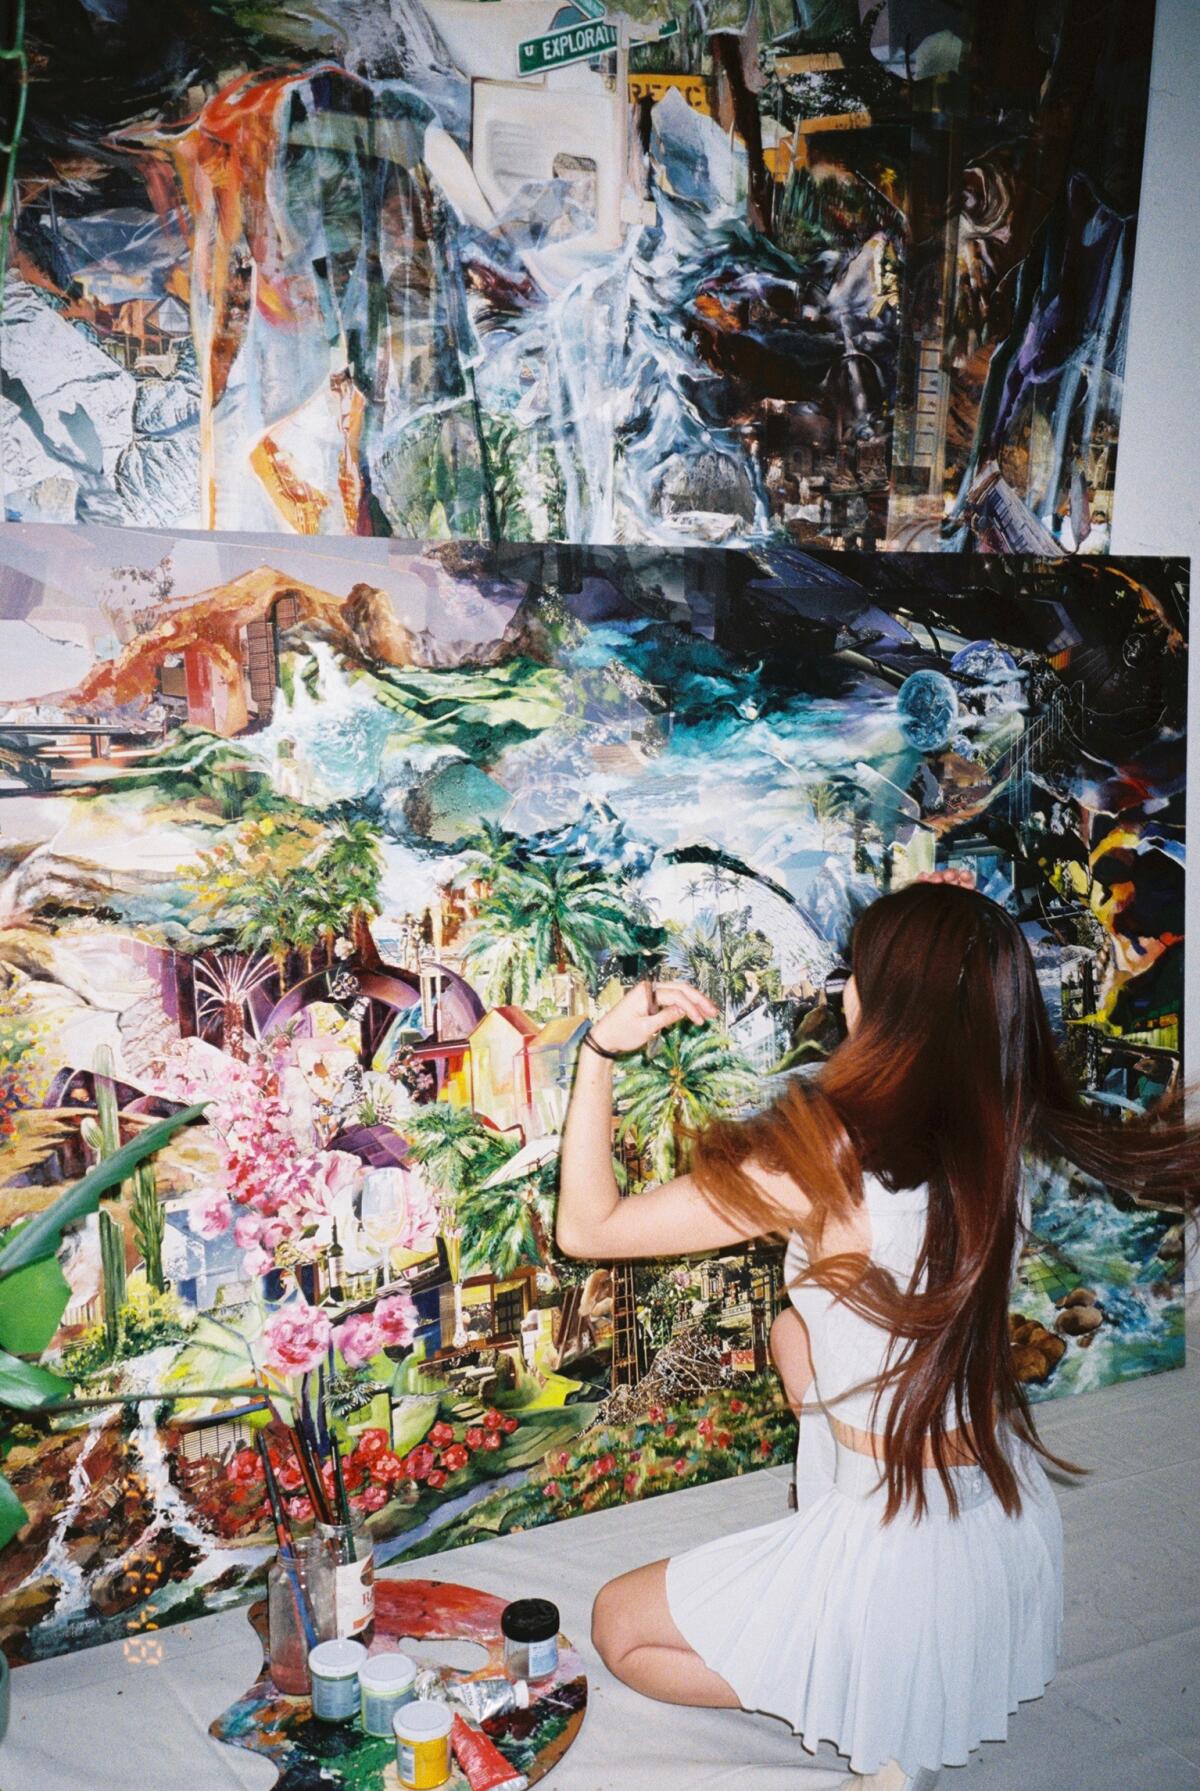 An artist kneeling and working on her colorful artwork.